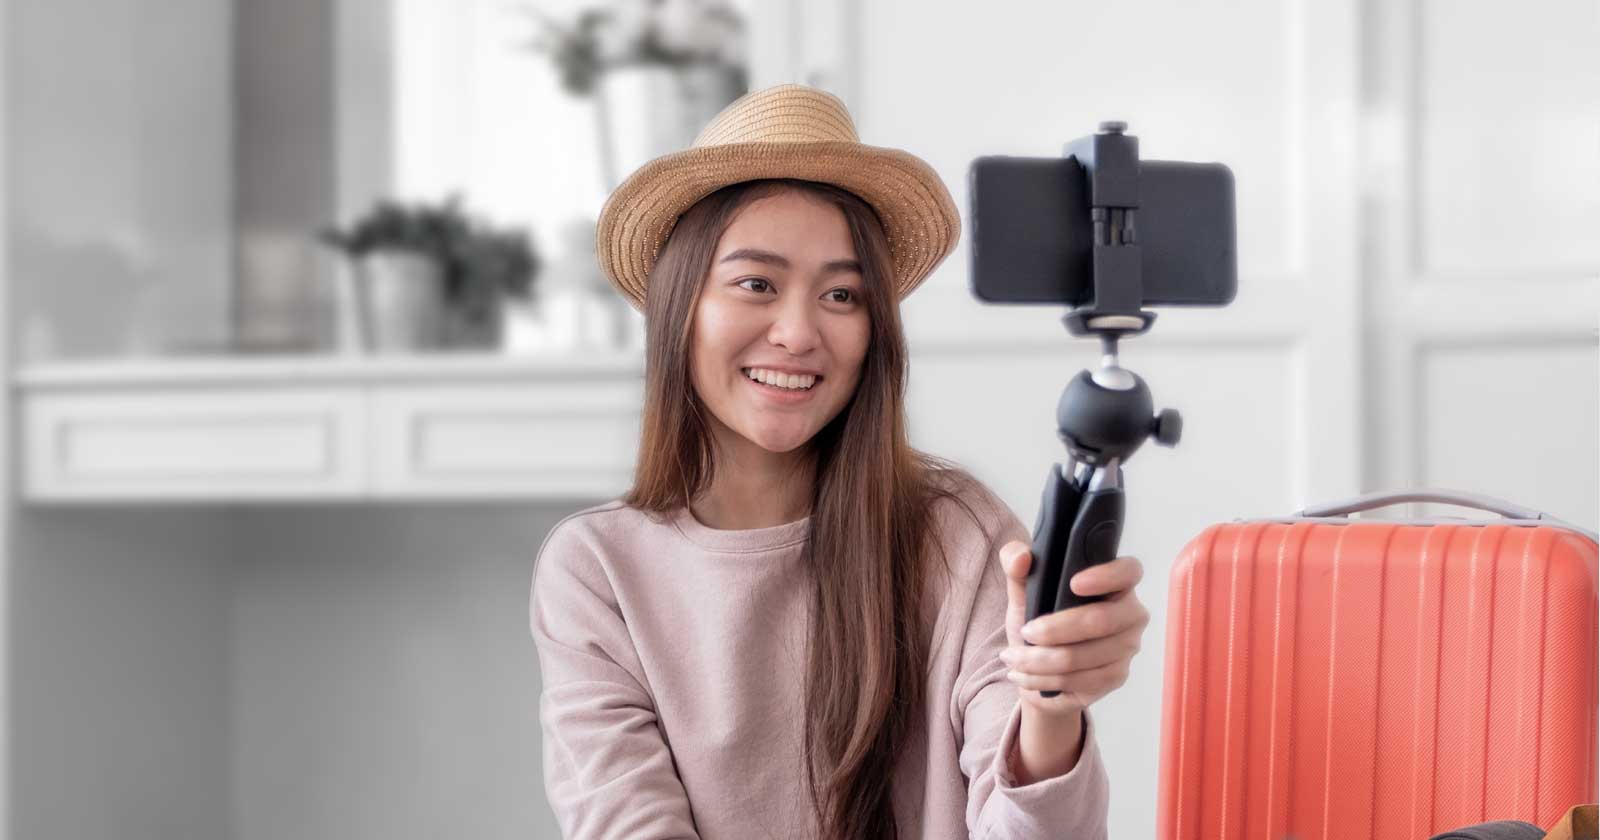 Image of a woman filming herself with a mobile phone